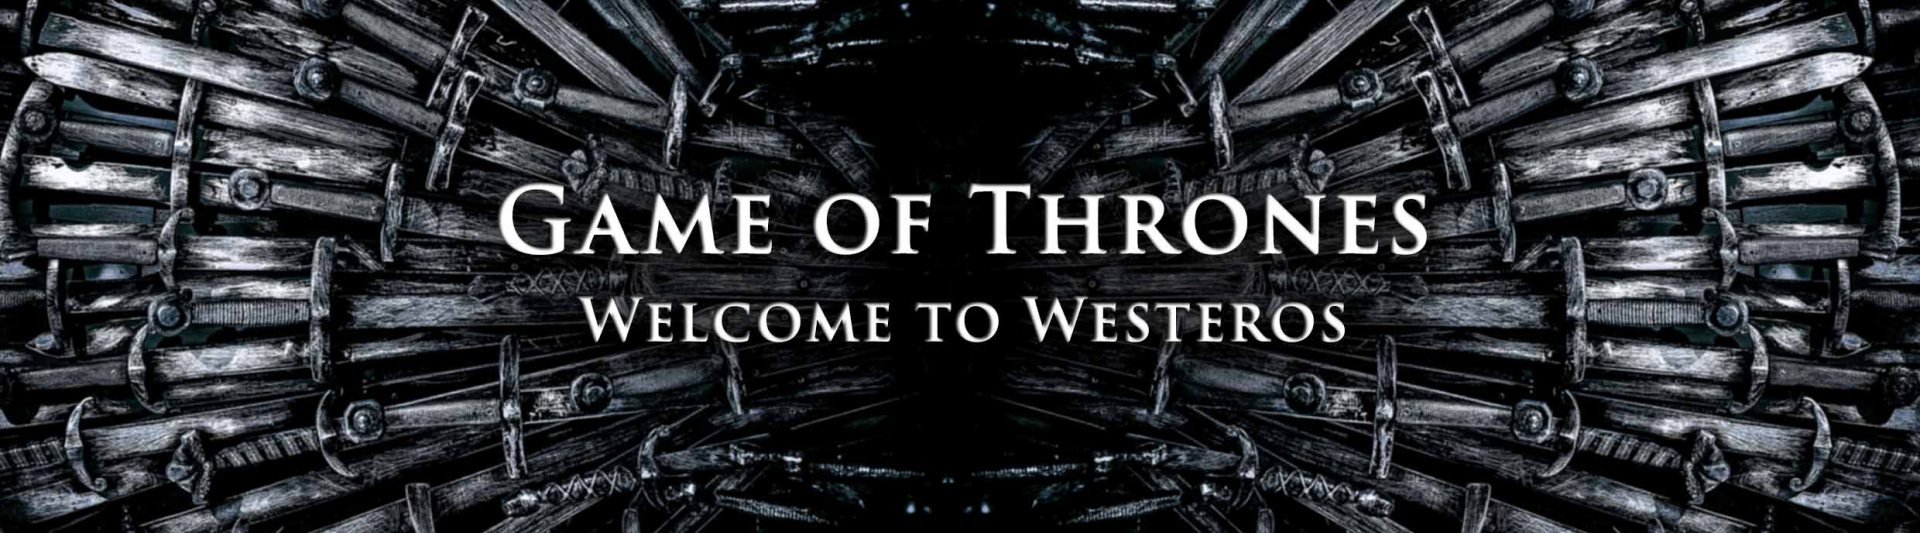 game of thrones bibliography